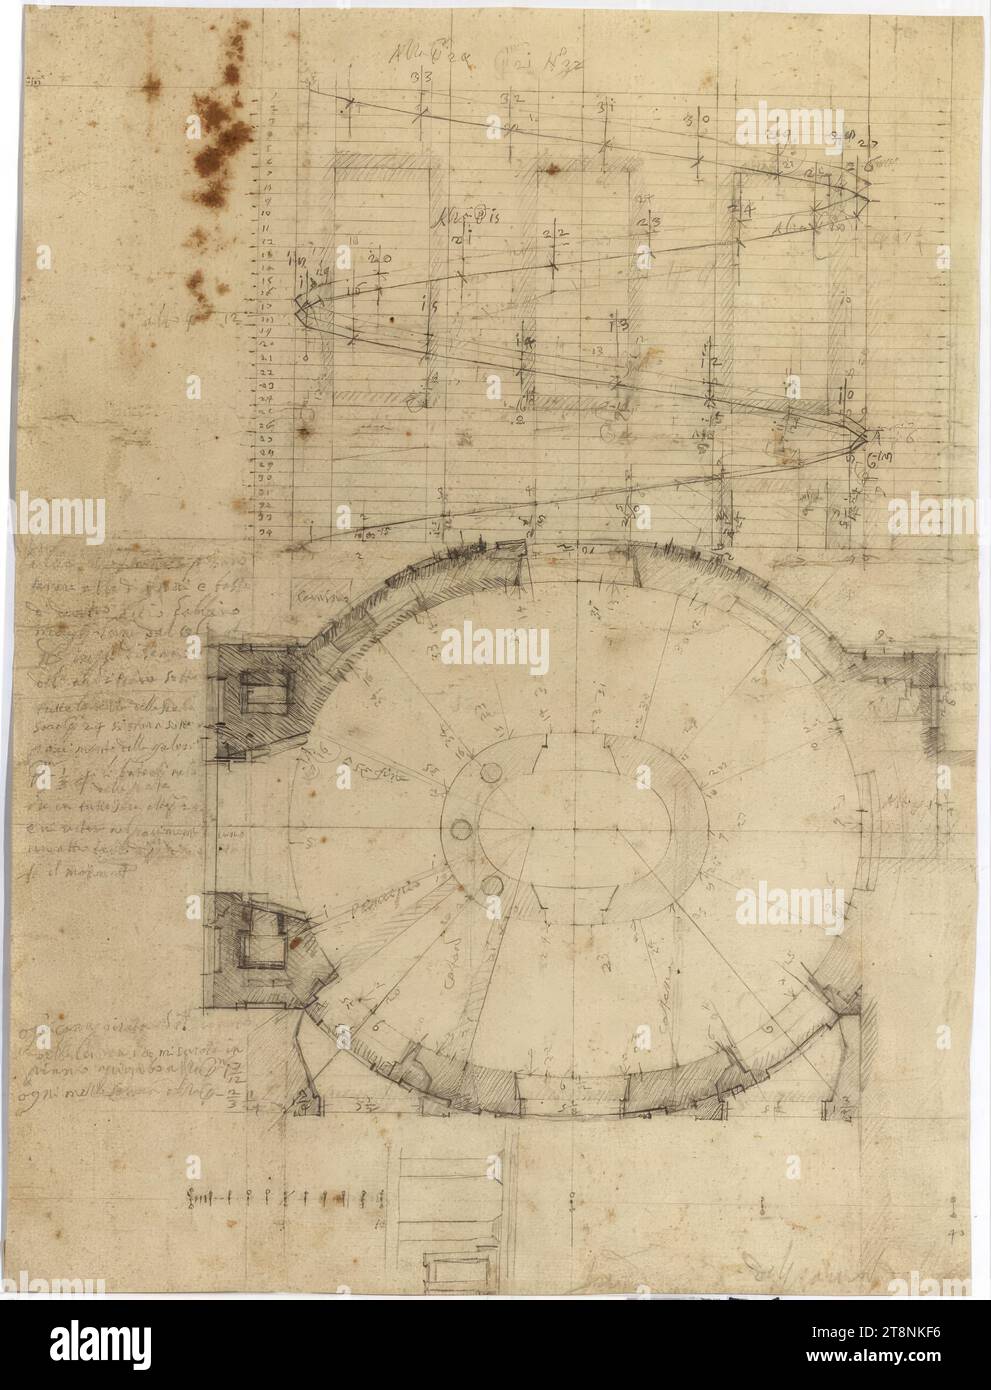 Rom, Sant' Agnese, Ovaltreppe, 1653-1657, Architekturzeichnung, Papier, mittelstark; Graphitzeichnung; Konstruktion, Zeichnung, Maßstab und Beschriftung in Graphit; zahlreiche Durchstiche, 42 x 31,4 cm, l.: 'the snail can, keep high on the outside and low, on the inside so that they have more light than the sky and, do not prevent, of the architrave below, the entire height of the staircase, sara mi 24 si stara sotto( ...), floor of the gallery, mi 1/3 for the swings in the, of the parts, which in all sra alto p.mi 2, and it will remain on the floor, another third of a span Stock Photo